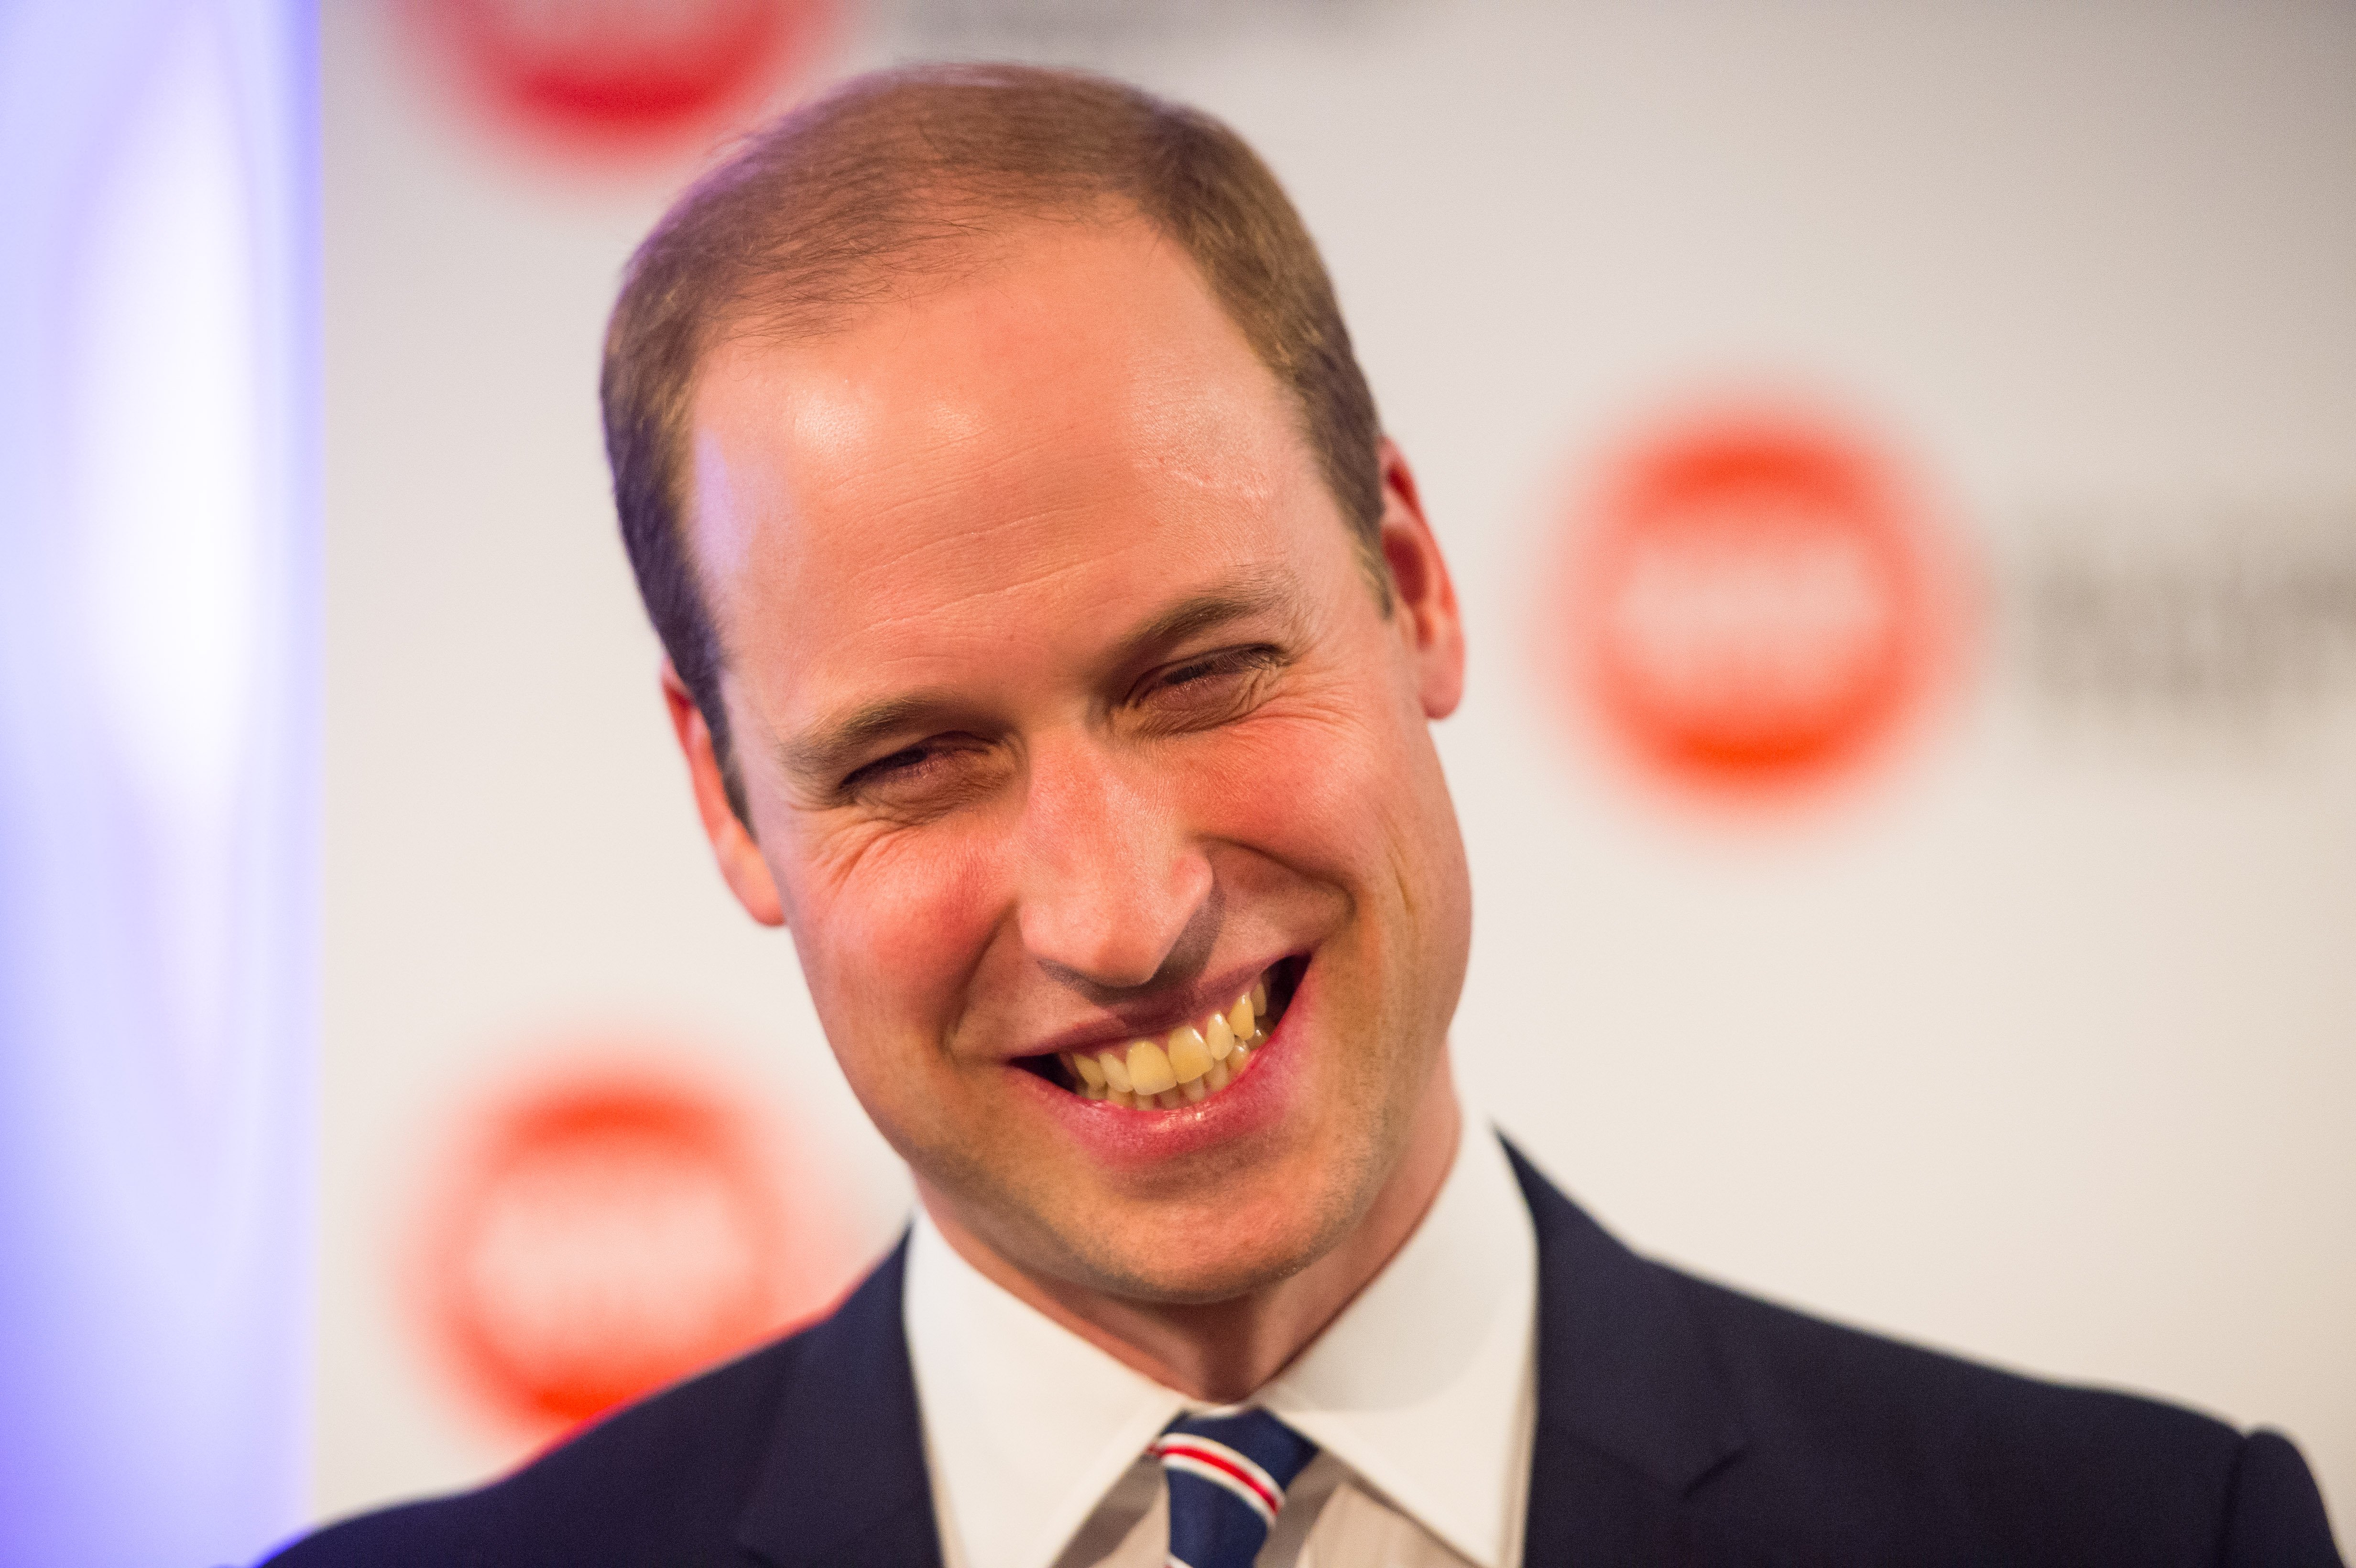 Prince William, Duke of Cambridge laughs as he attends the launch of the Centrepoint Awards at the HSBC private bank on November 19, 2015 in London, | Photo: GettyImages